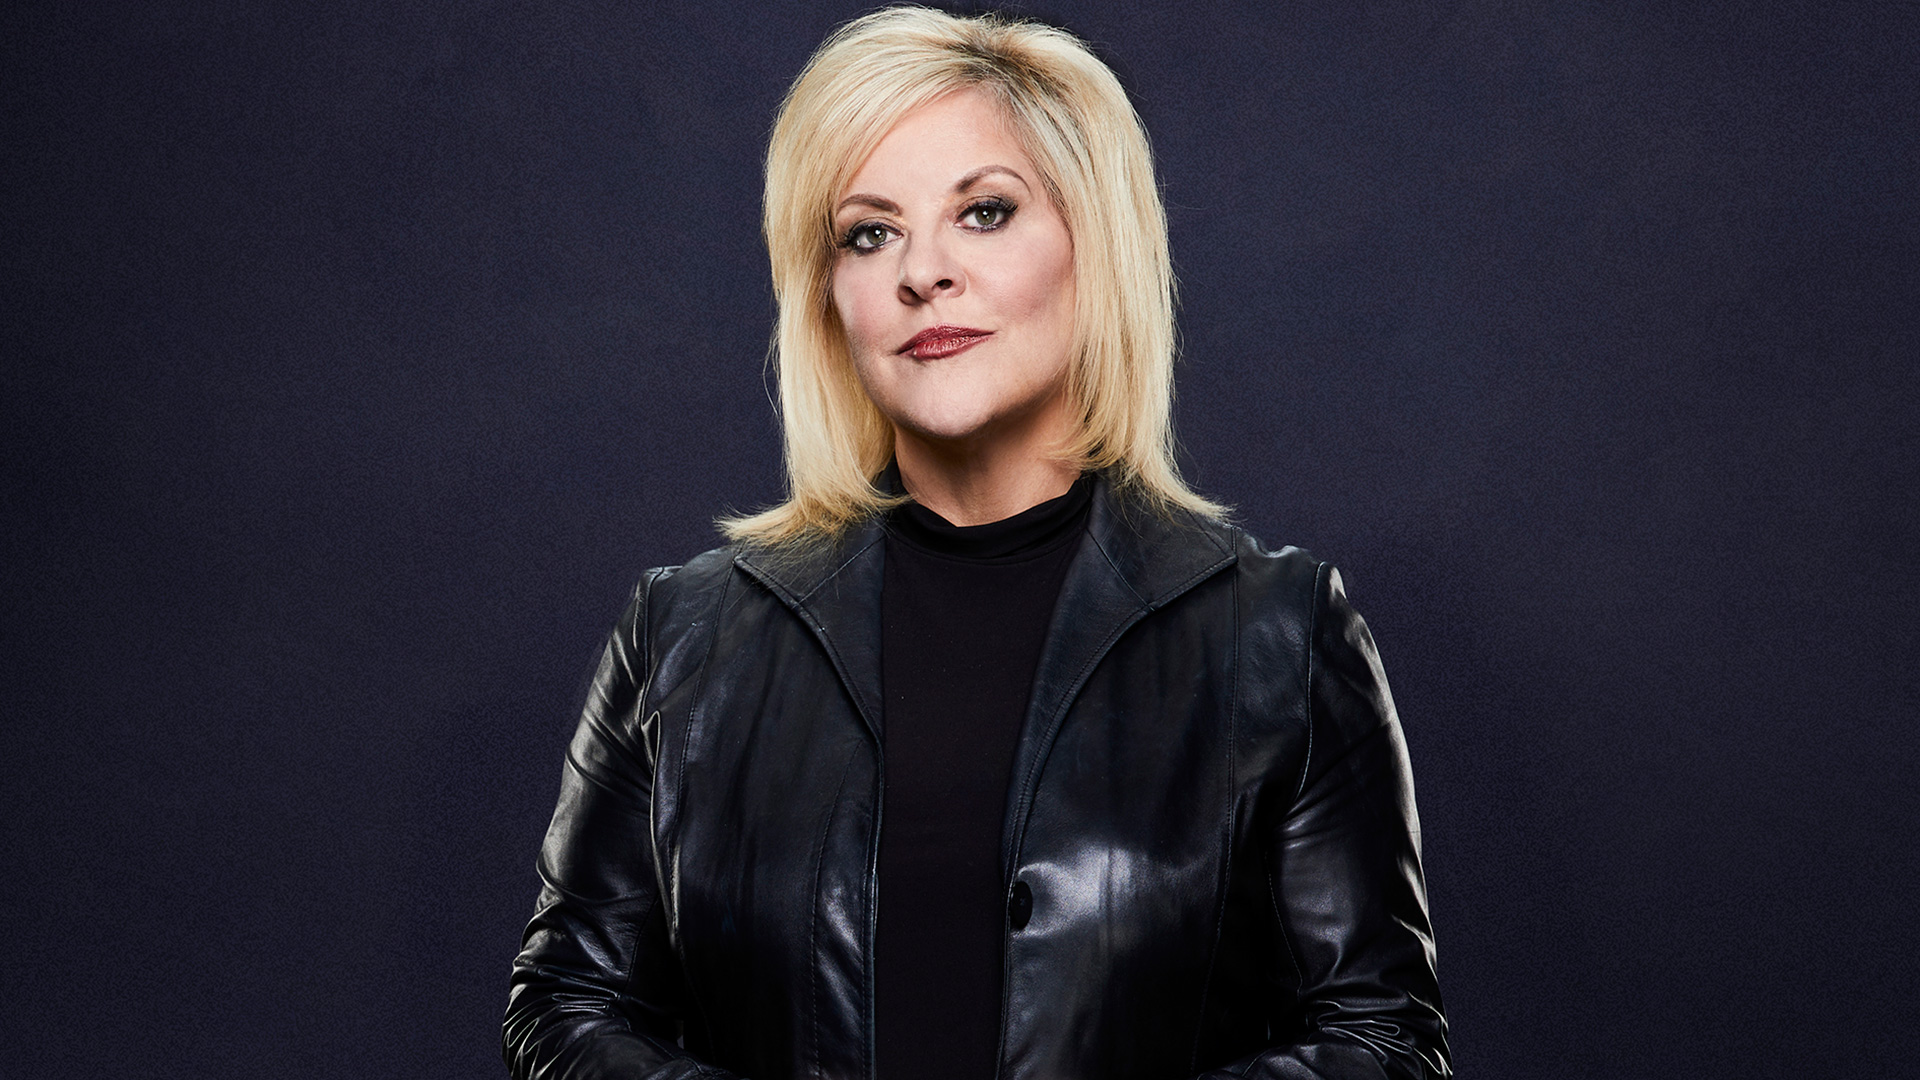 Nancy Grace on Covering Crime as a 'Straightjacket Mom'